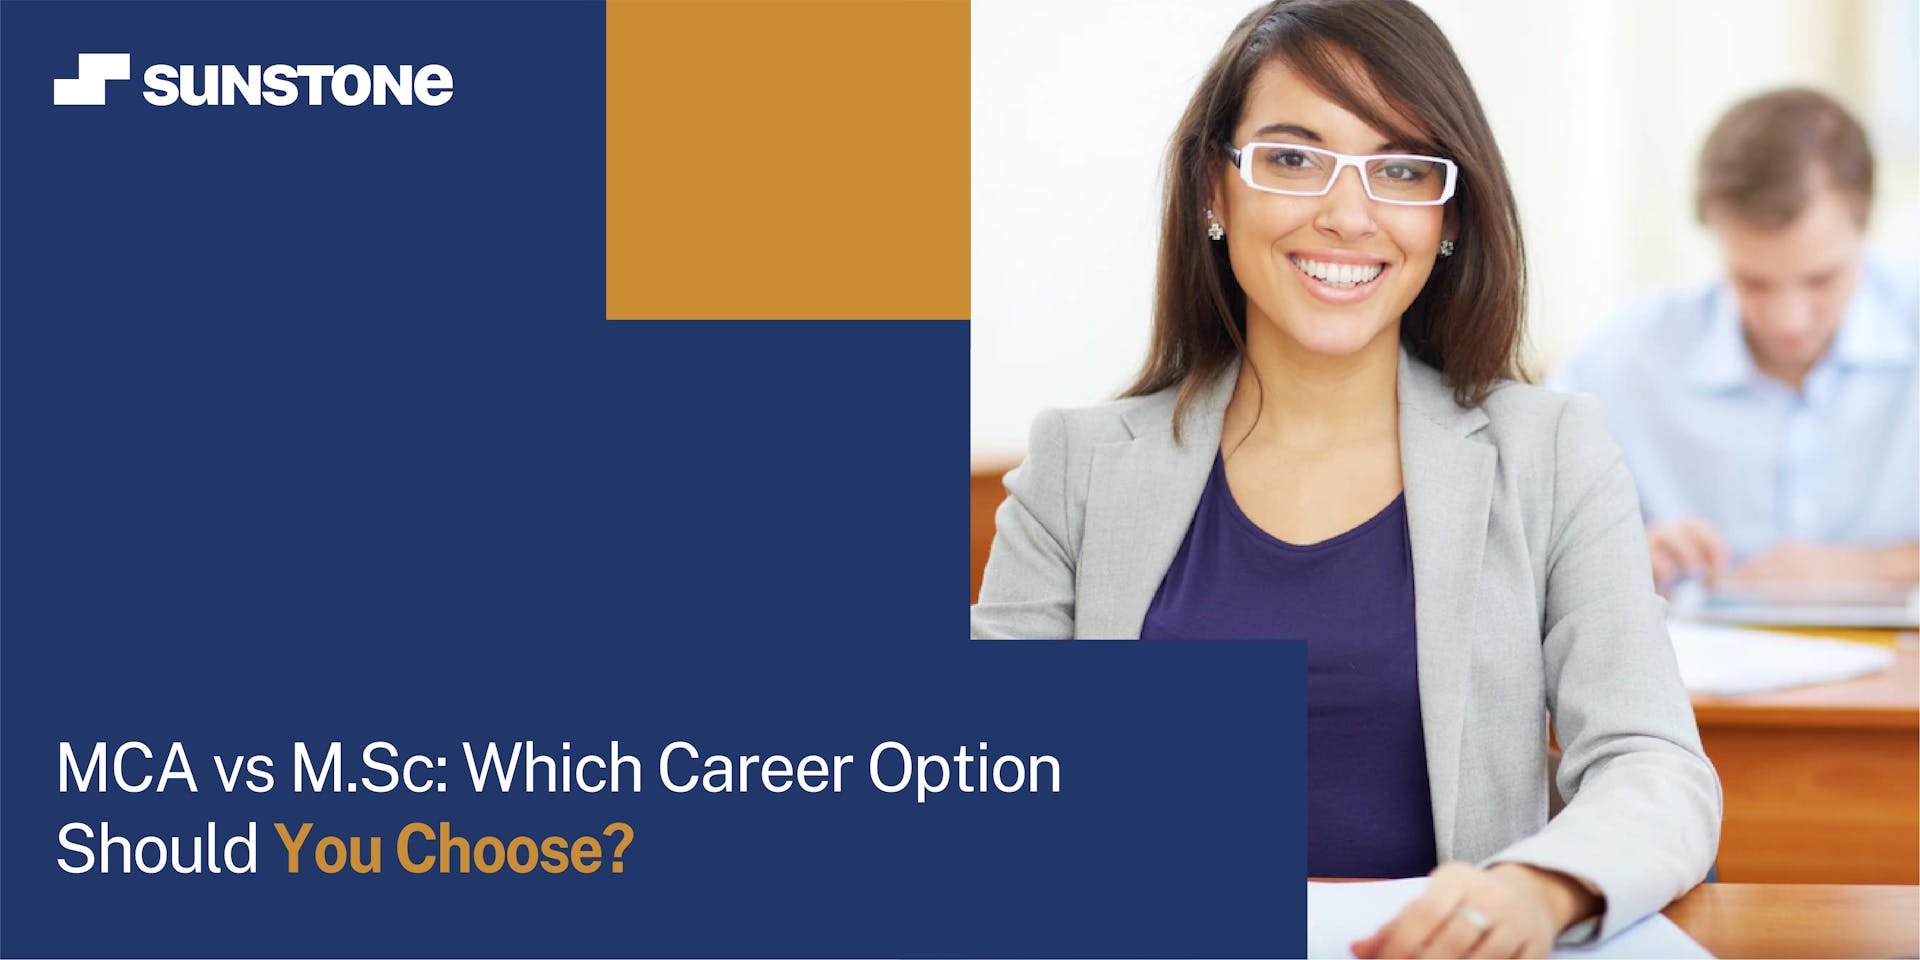 MCA vs M.Sc: Which Career Option Should You Choose?